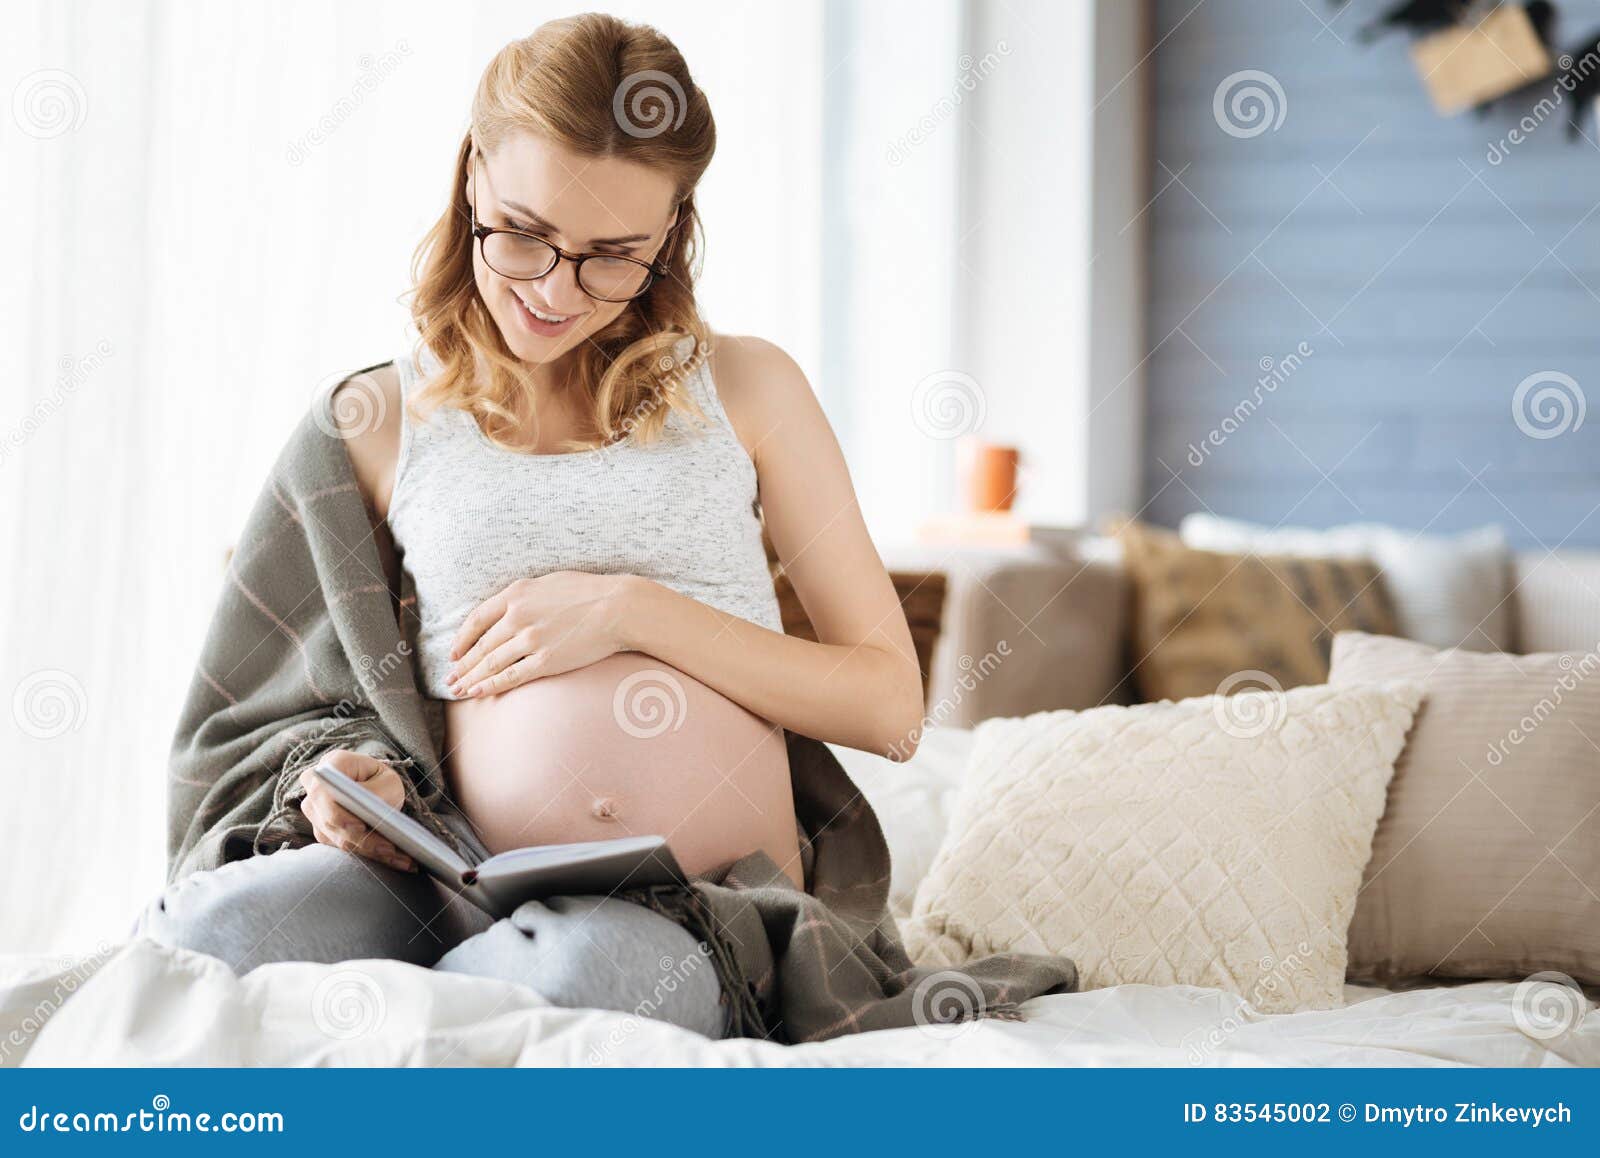 Pregnant Woman Relaxing With Book In Bedroom Stock Photo